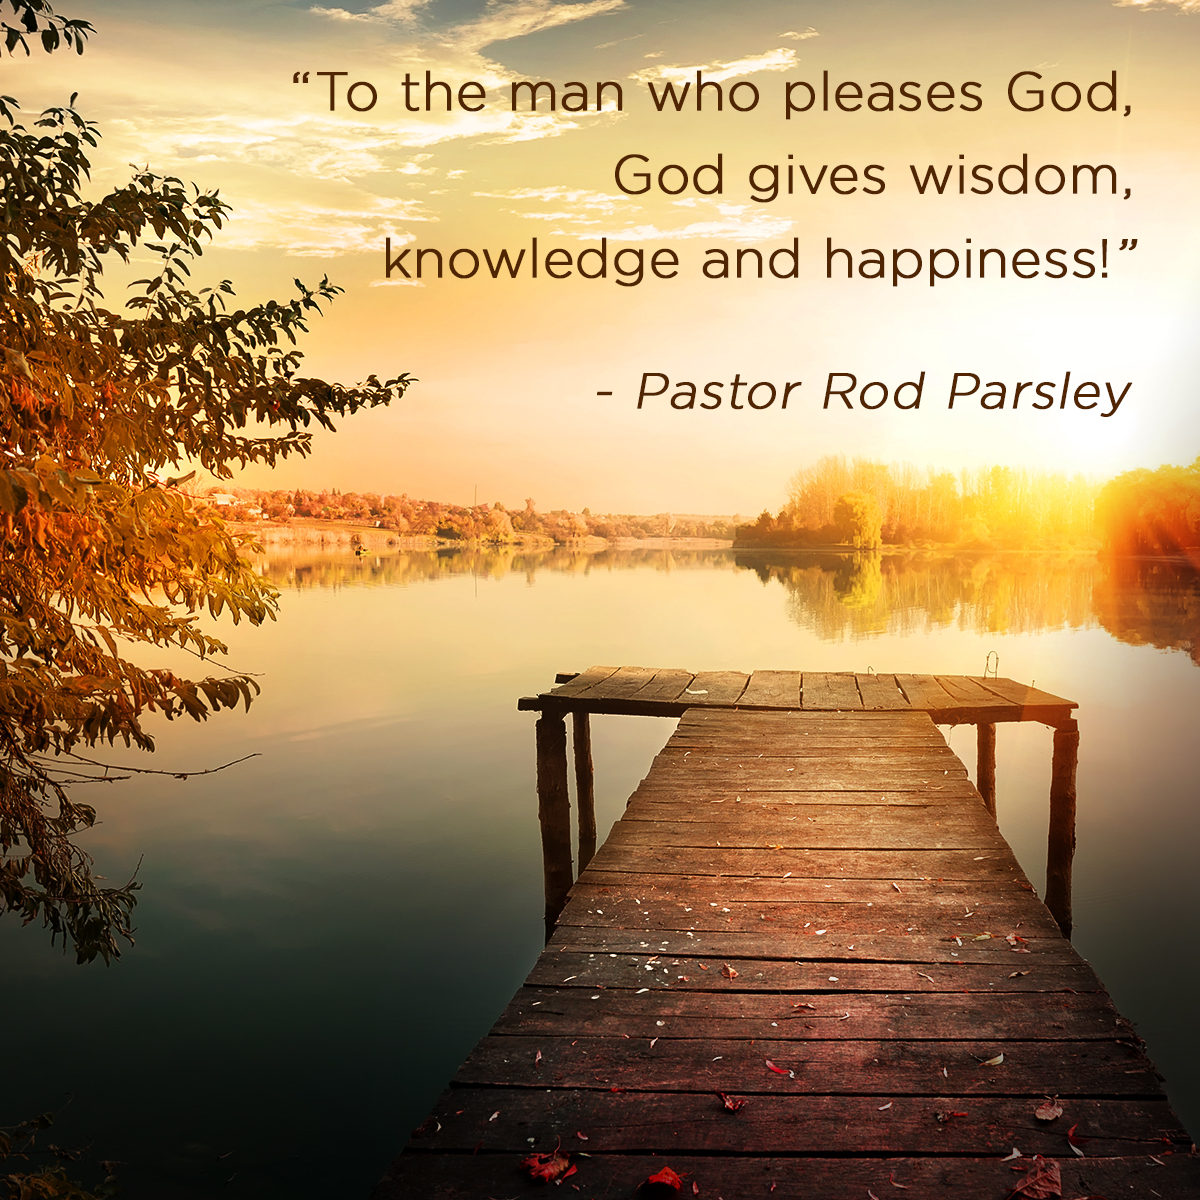 “To the man who pleases God, God gives wisdom, knowledge and happiness!” – Pastor Rod Parsley